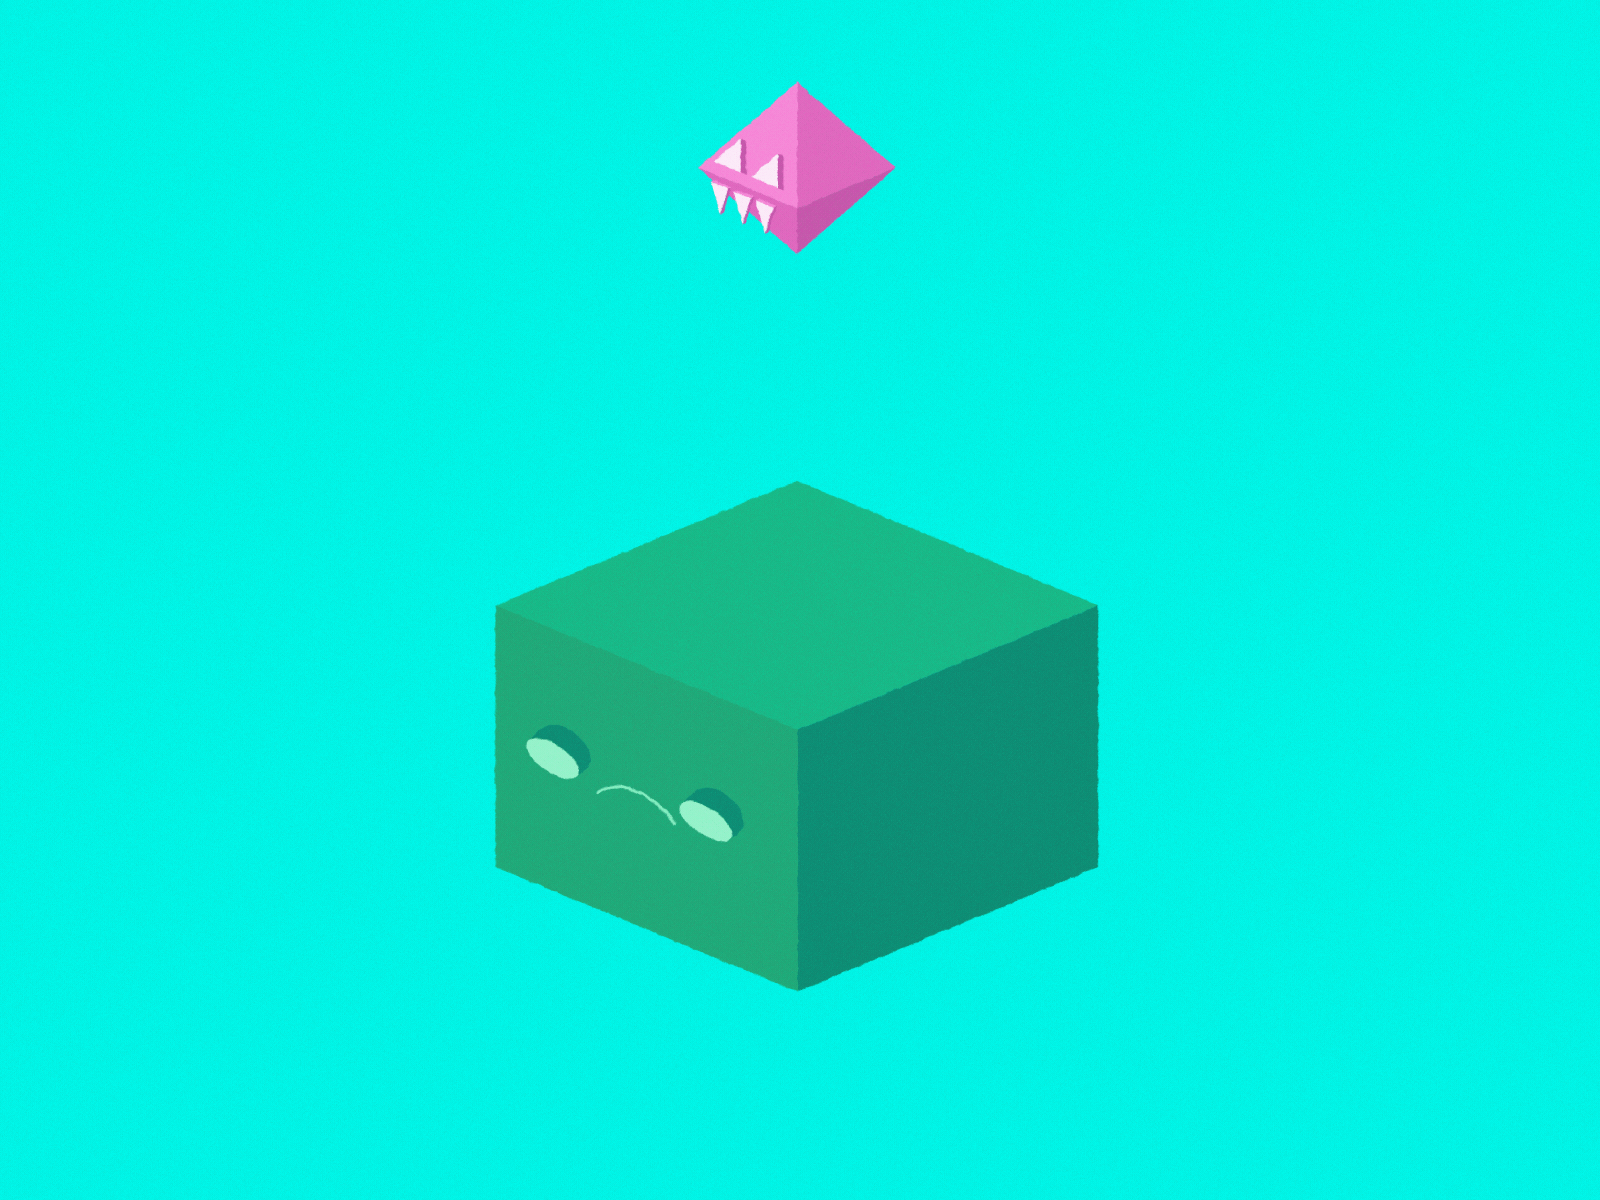 Bouncing crystalls 2danimation angry bounce character character animation crystall cube cute illustration isometric isometric art isometric illustration joysticks n sliders joysticksnsliders jump mineral motion design play rigging sad